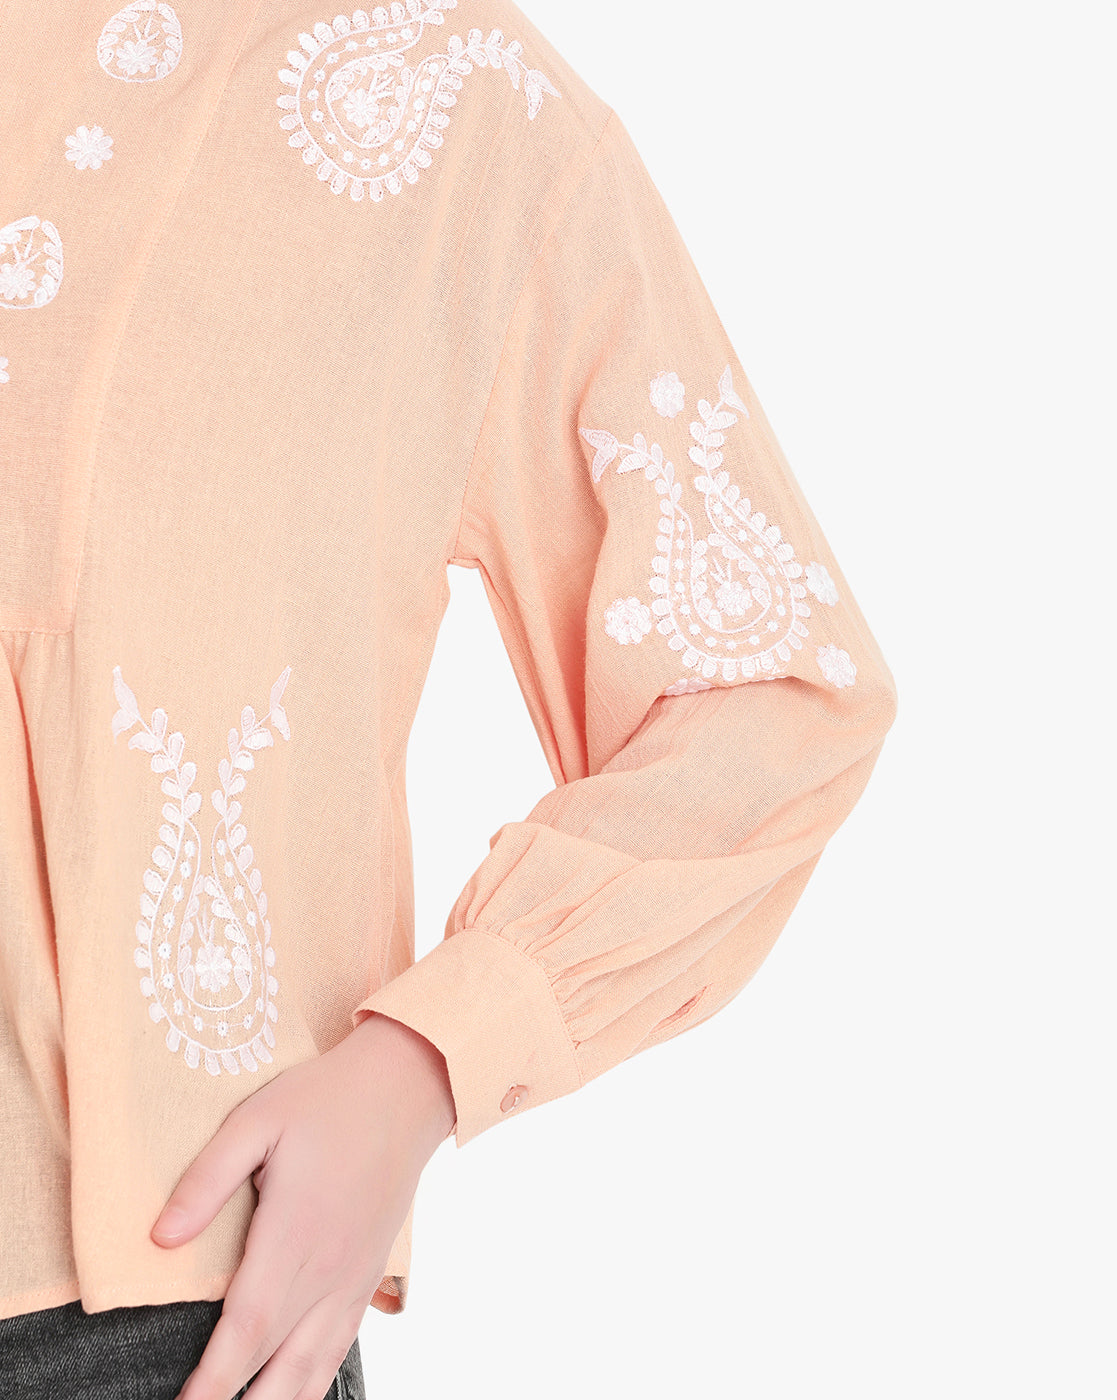 Coral Blossom Embroidered Top